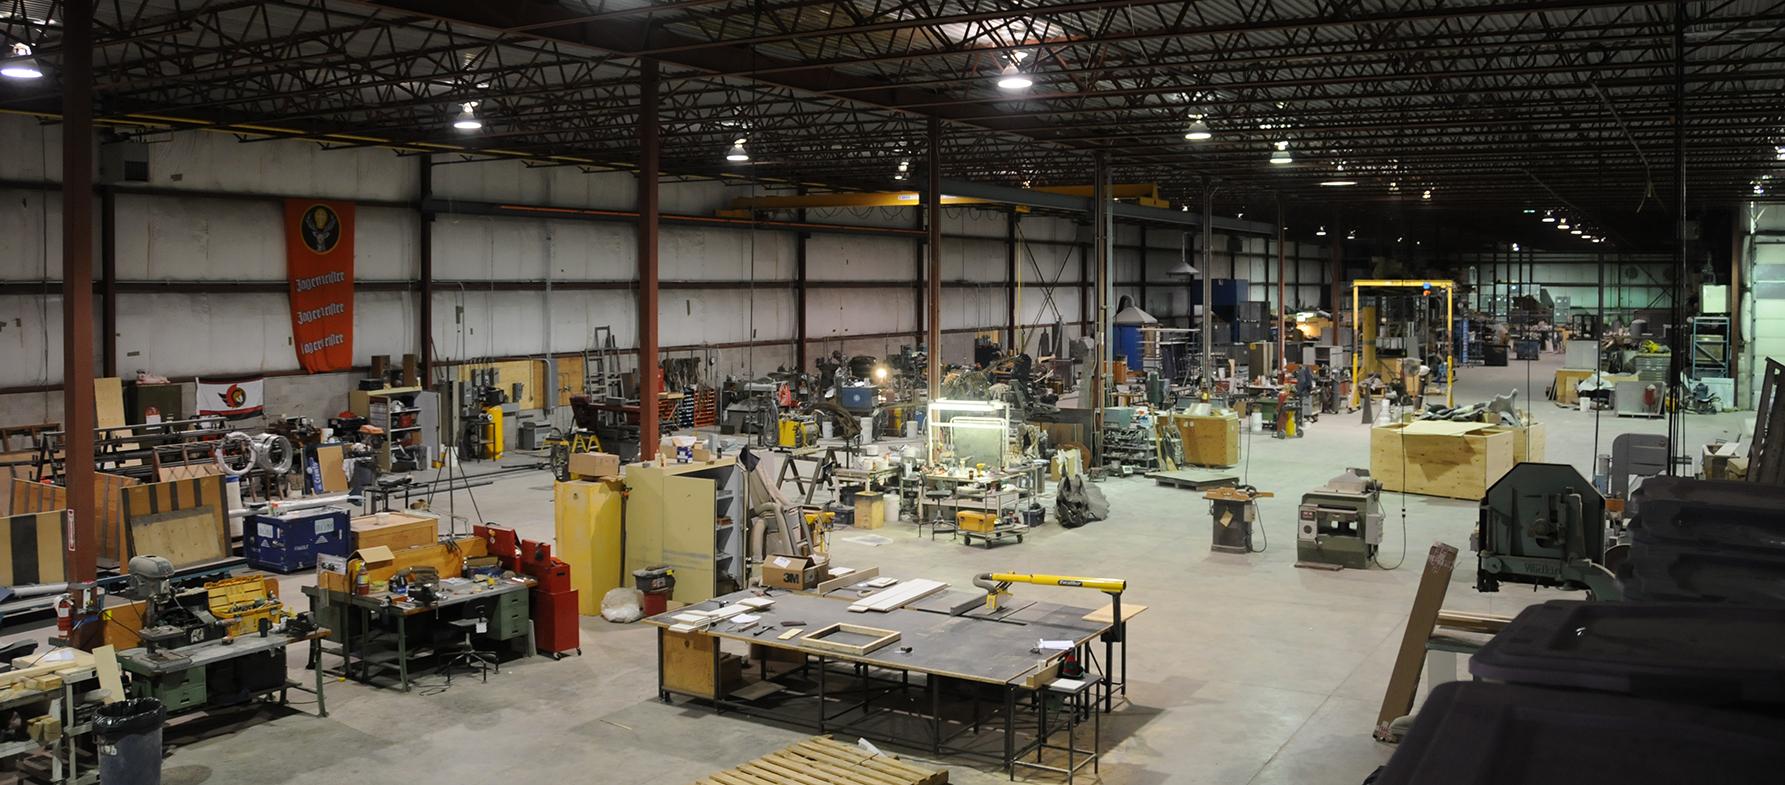 The RCI facility has over 48,000 square feet of warehouse space